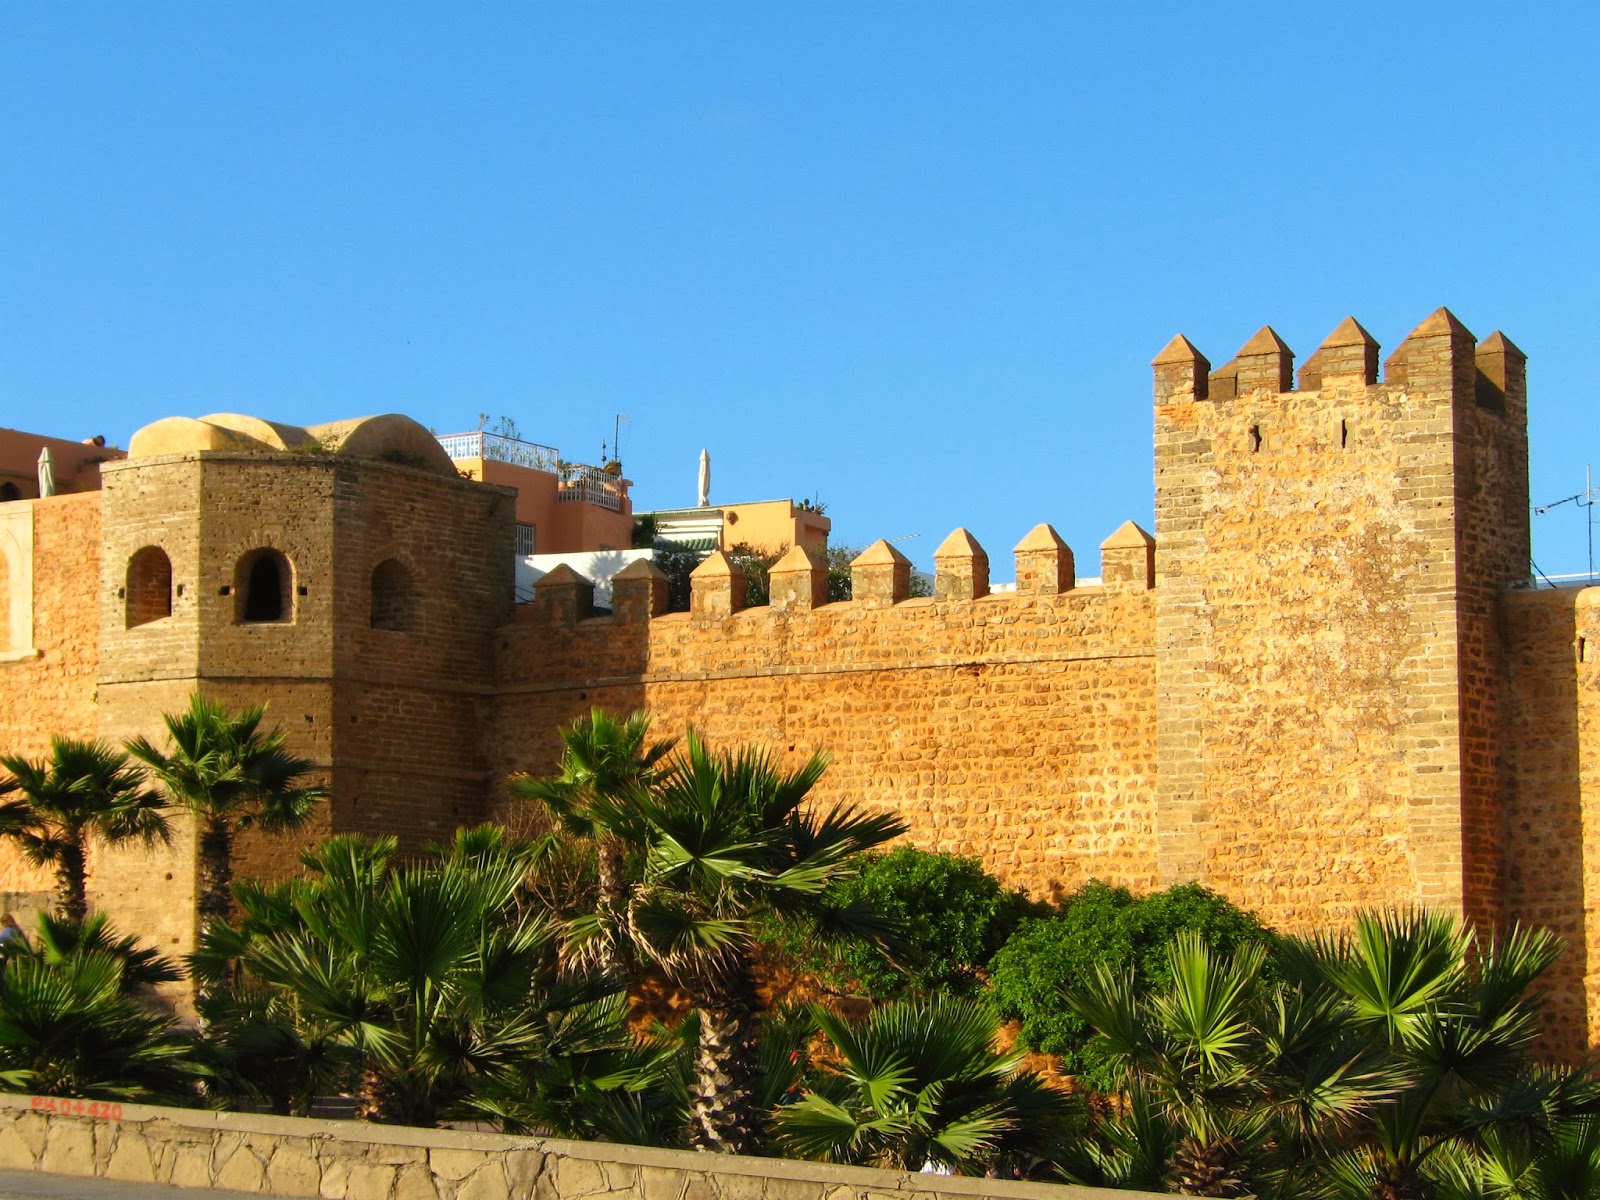 viva-la-voyage-the-people-and-sights-of-the-old-kasbah-in-rabat-morocco